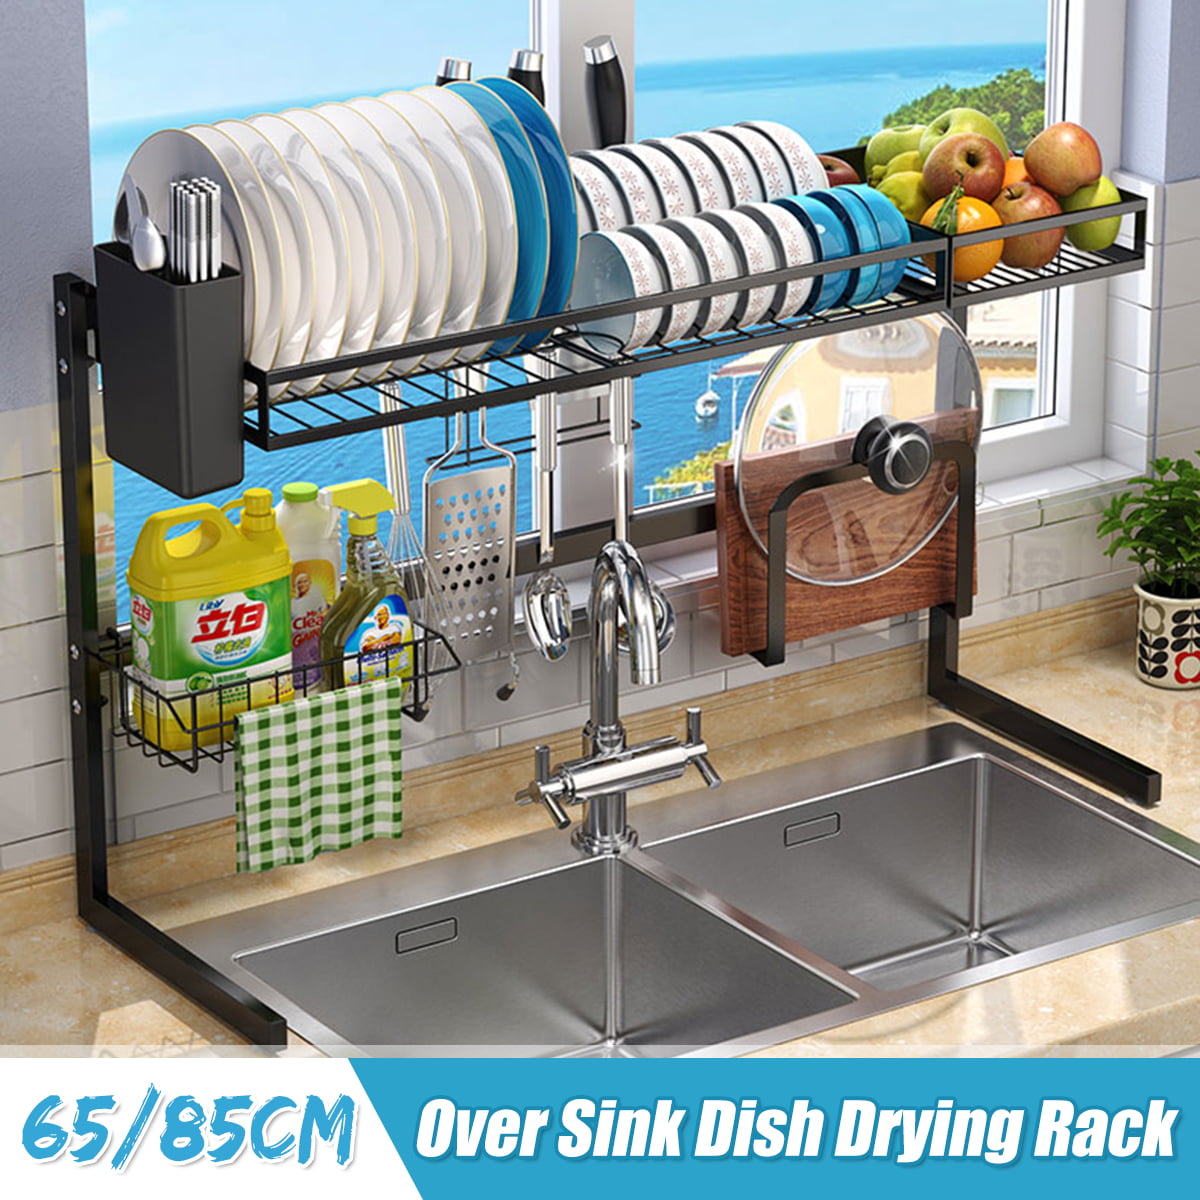 Large Capacity Over Sink Dish Drying Rack Drainer Shelf Stainless St